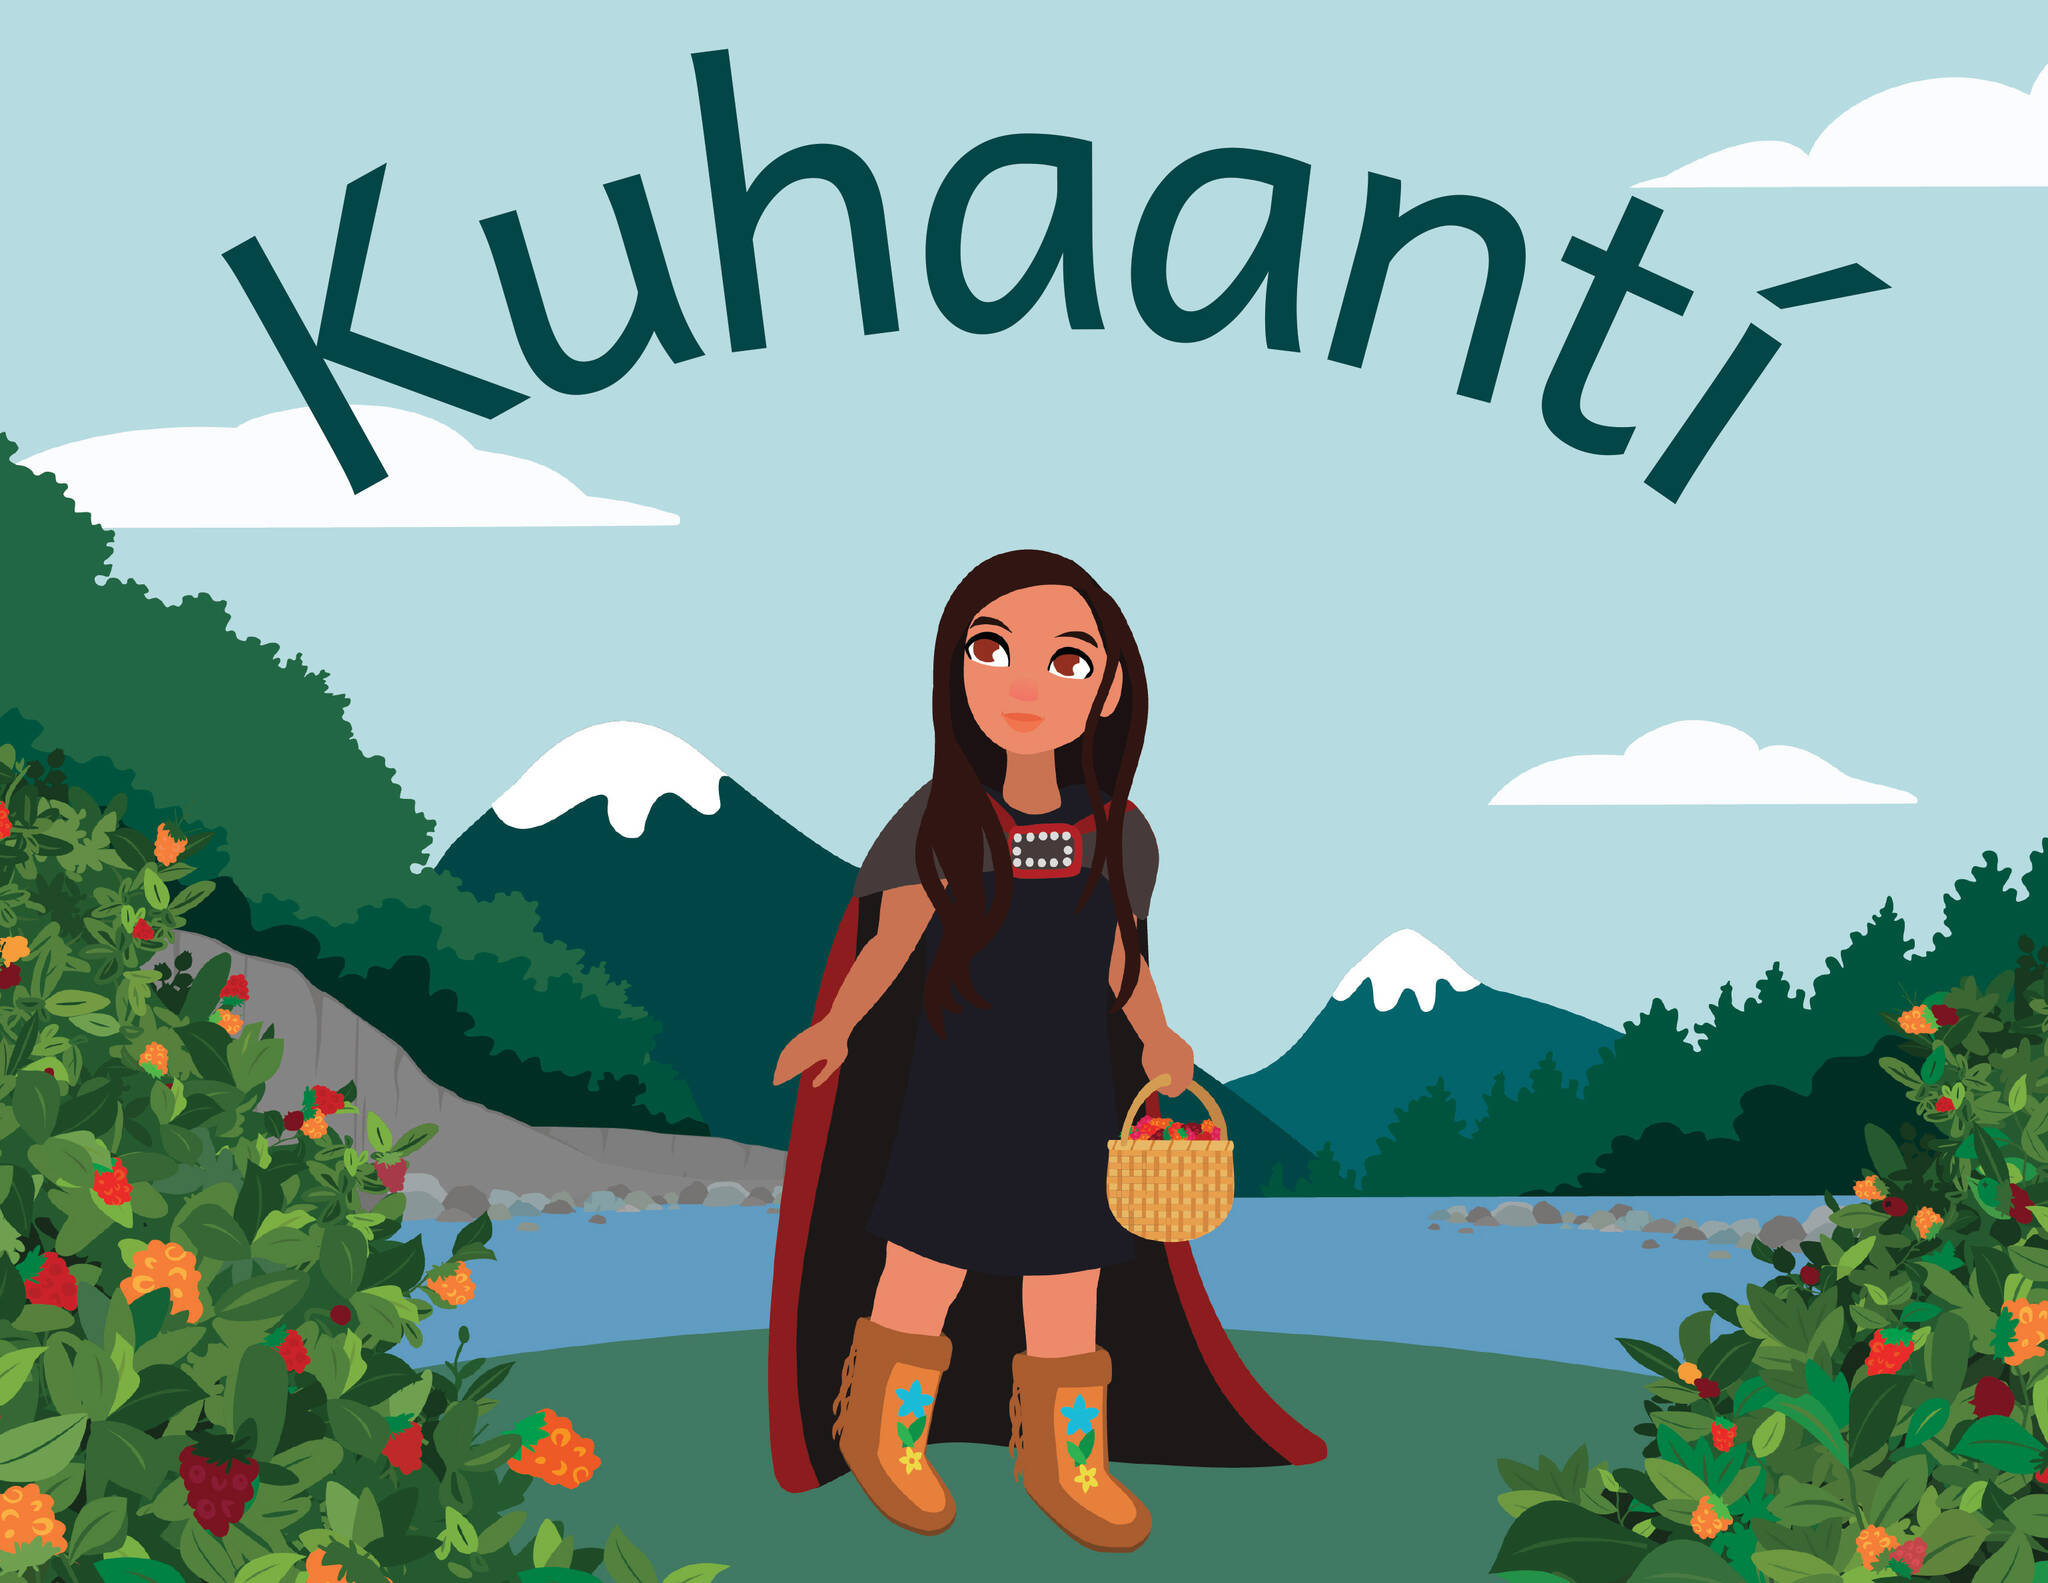 The cover of the children’s story “Kuhaantí,” the first book of its kind released in Lingít in decades, according to people who collaborated on the project. (Image courtesy of Central Council of Tlingit and Haida Indian Tribes of Alaska)